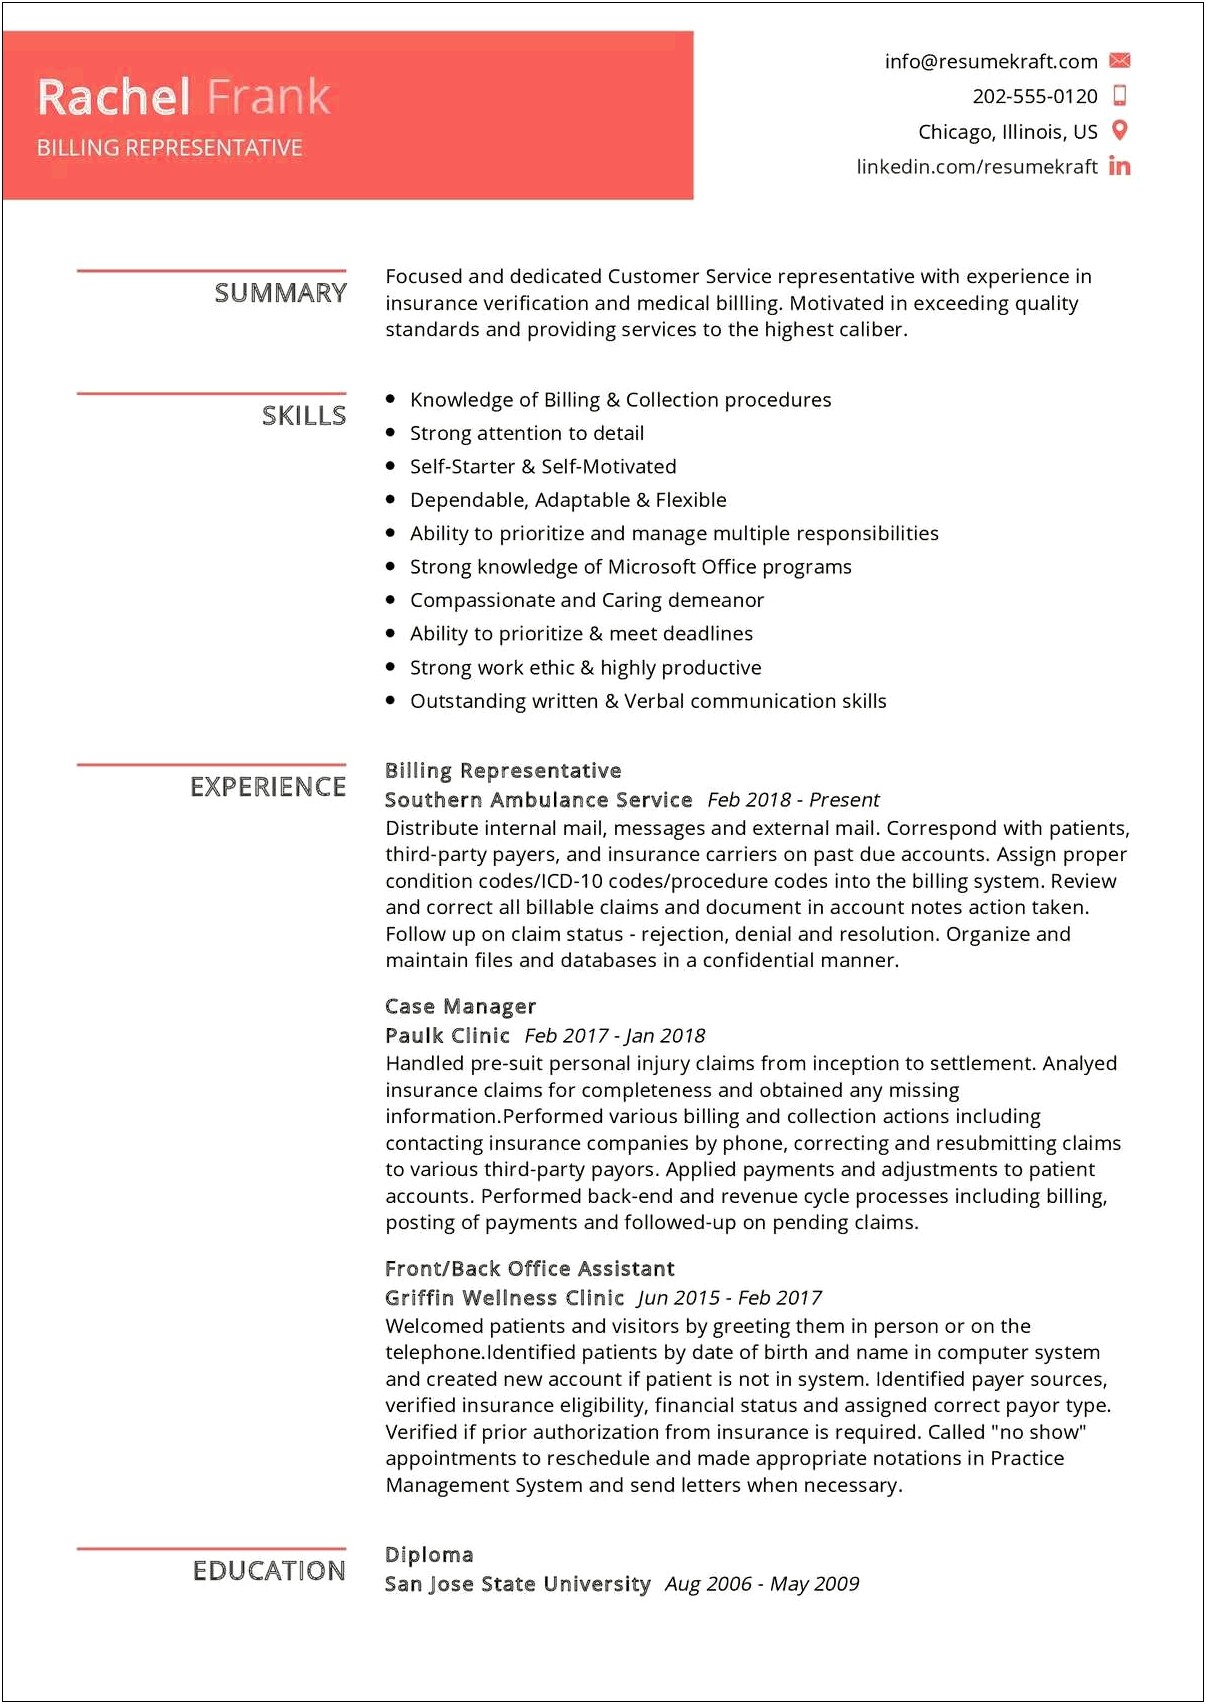 Revenue Cycle Management Experience Resume